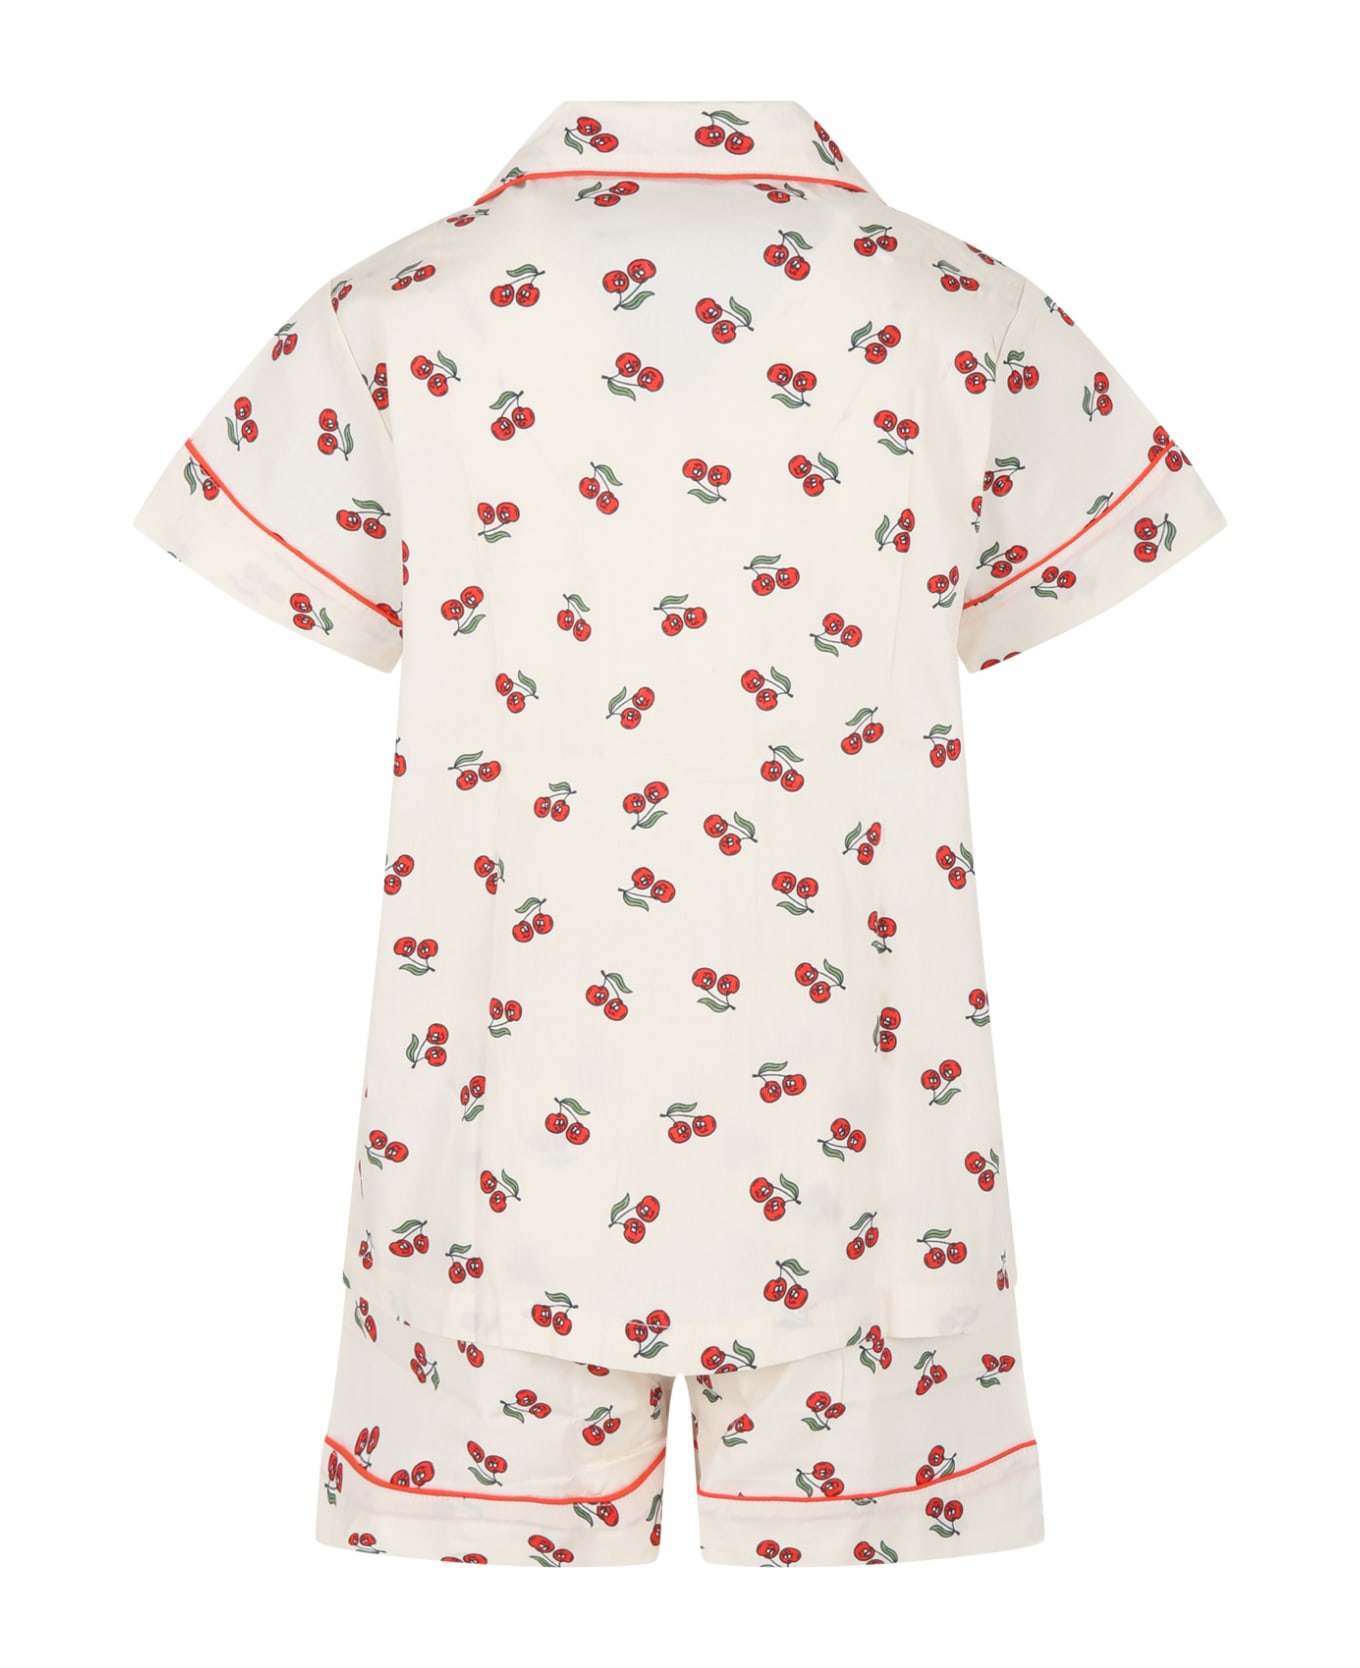 Molo Ivory Pajamas For Girl With Red Cherries - White